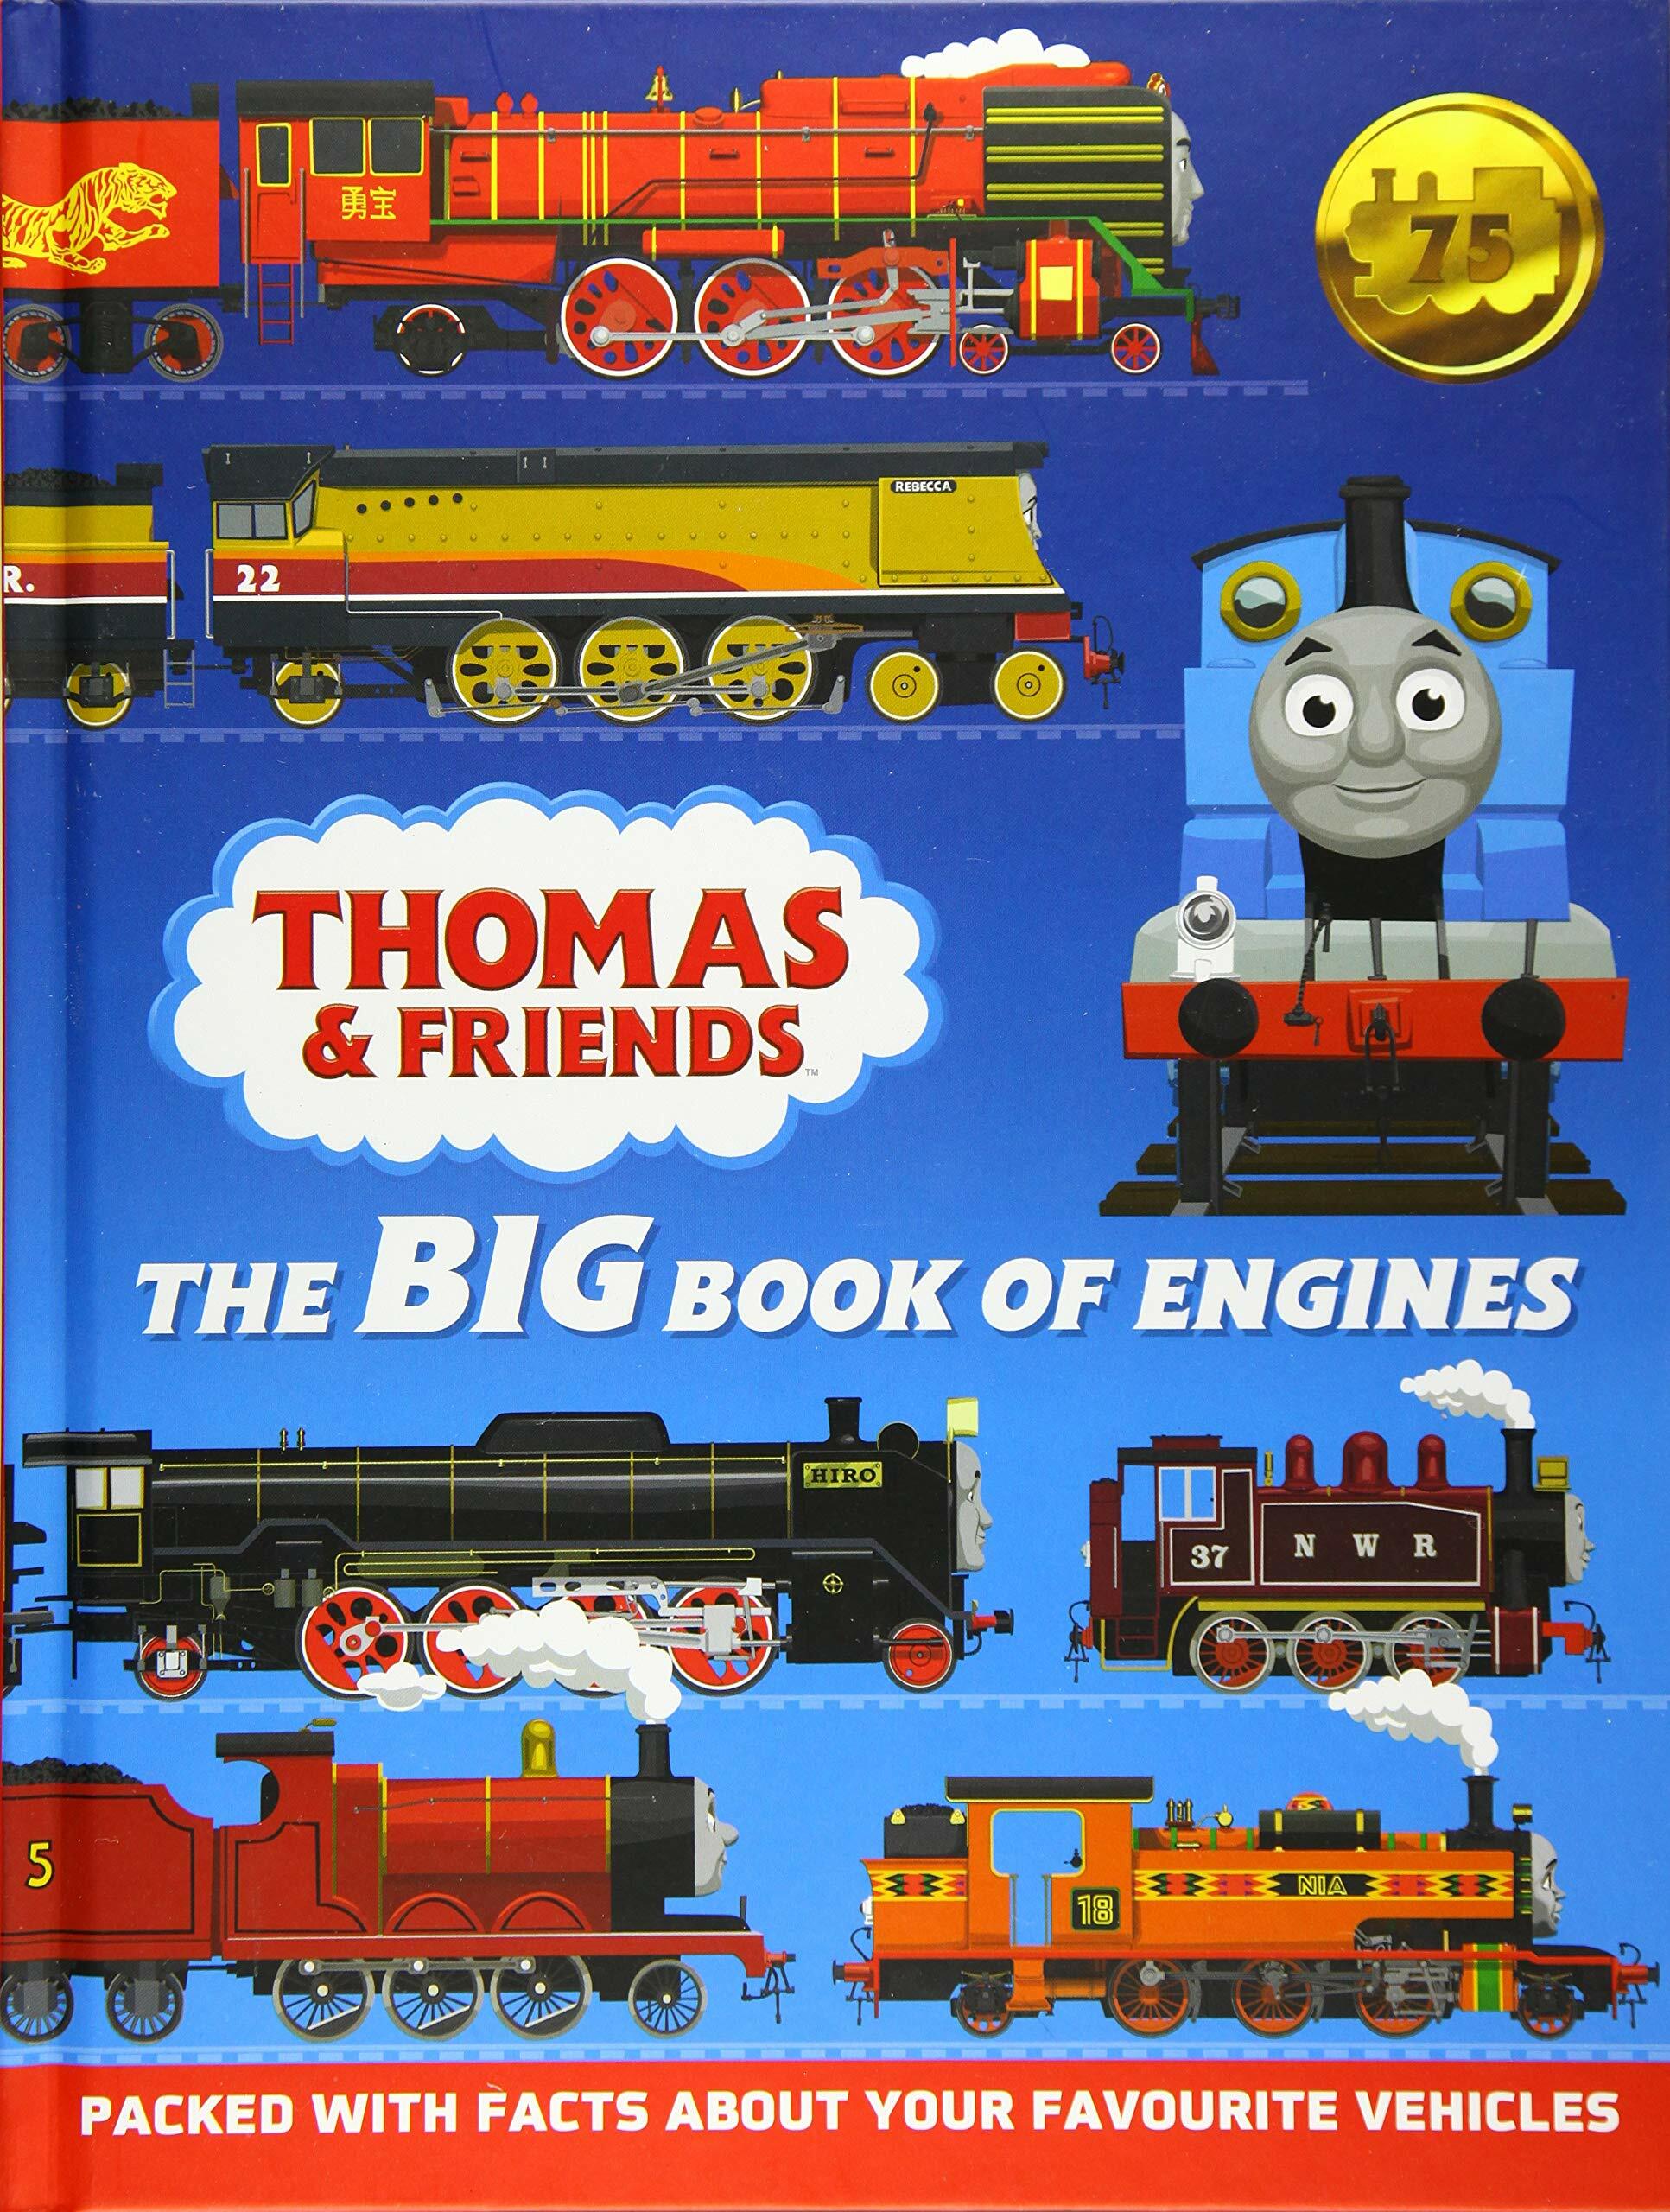 Thomas & Friends: The Big Book of Engines (Hardcover)